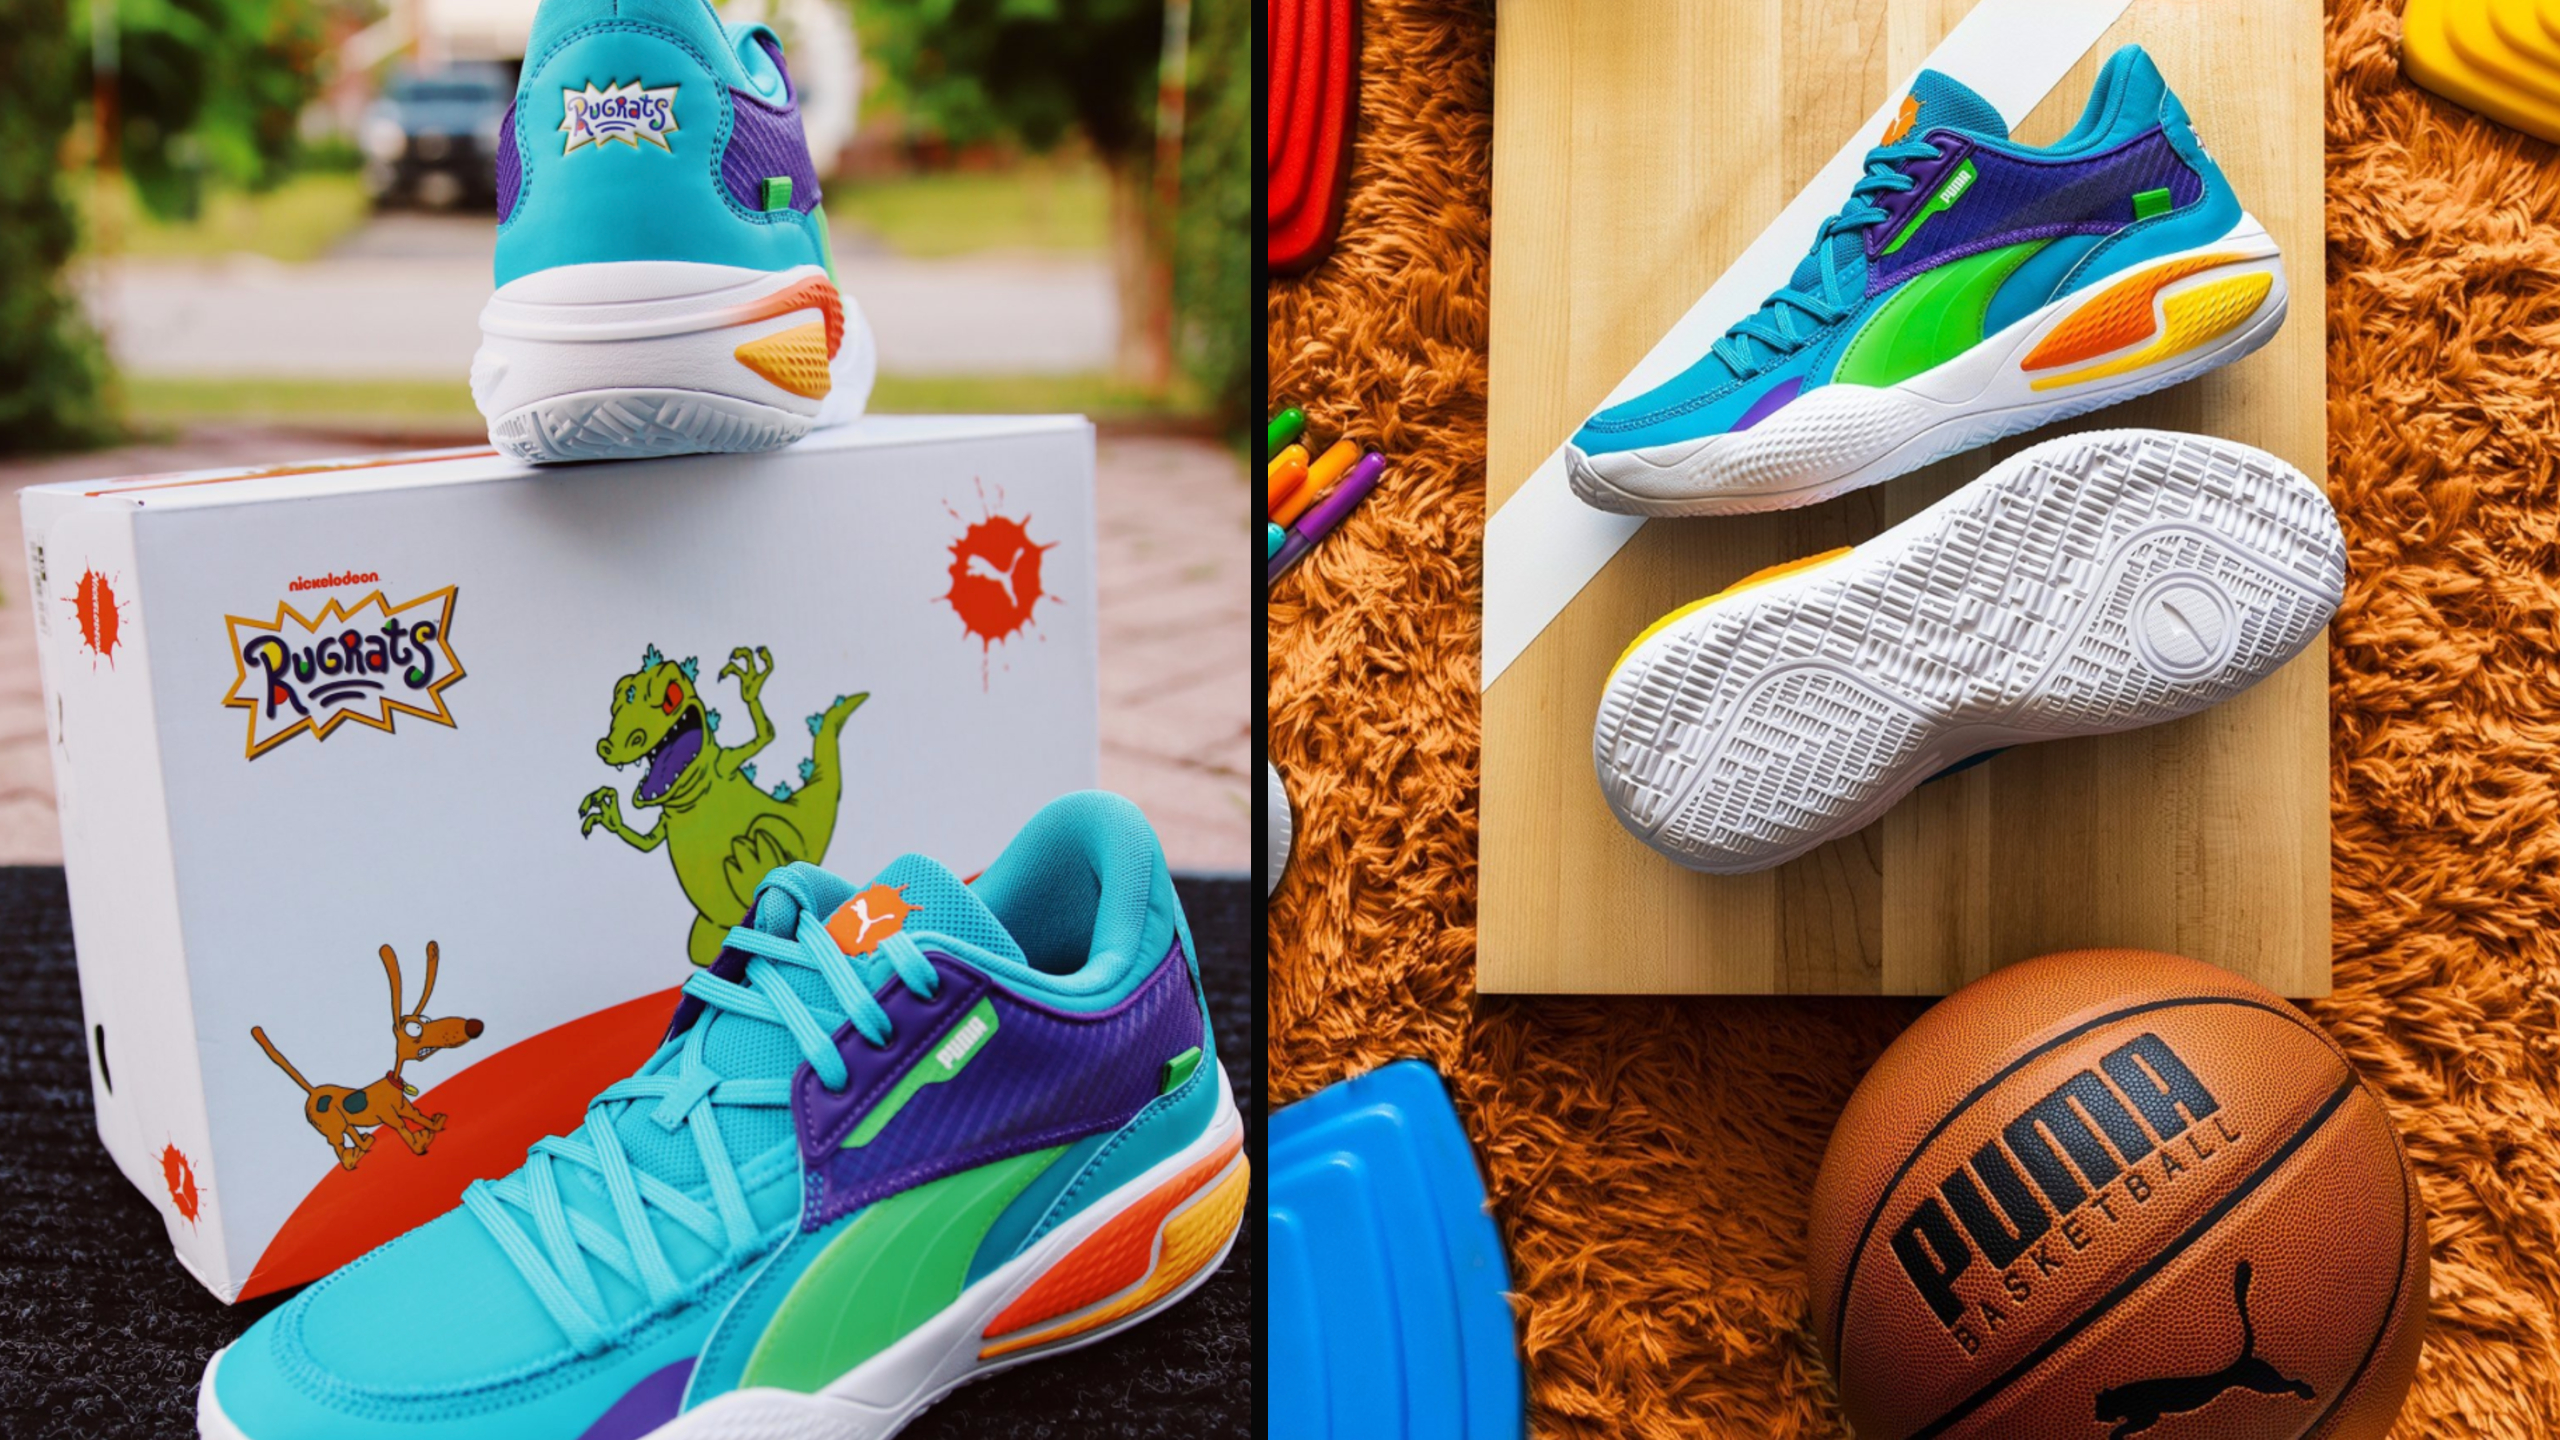 Rugrats And Puma Collab Is Pure, Please Take Your Shoes Off Rugrats Meaning